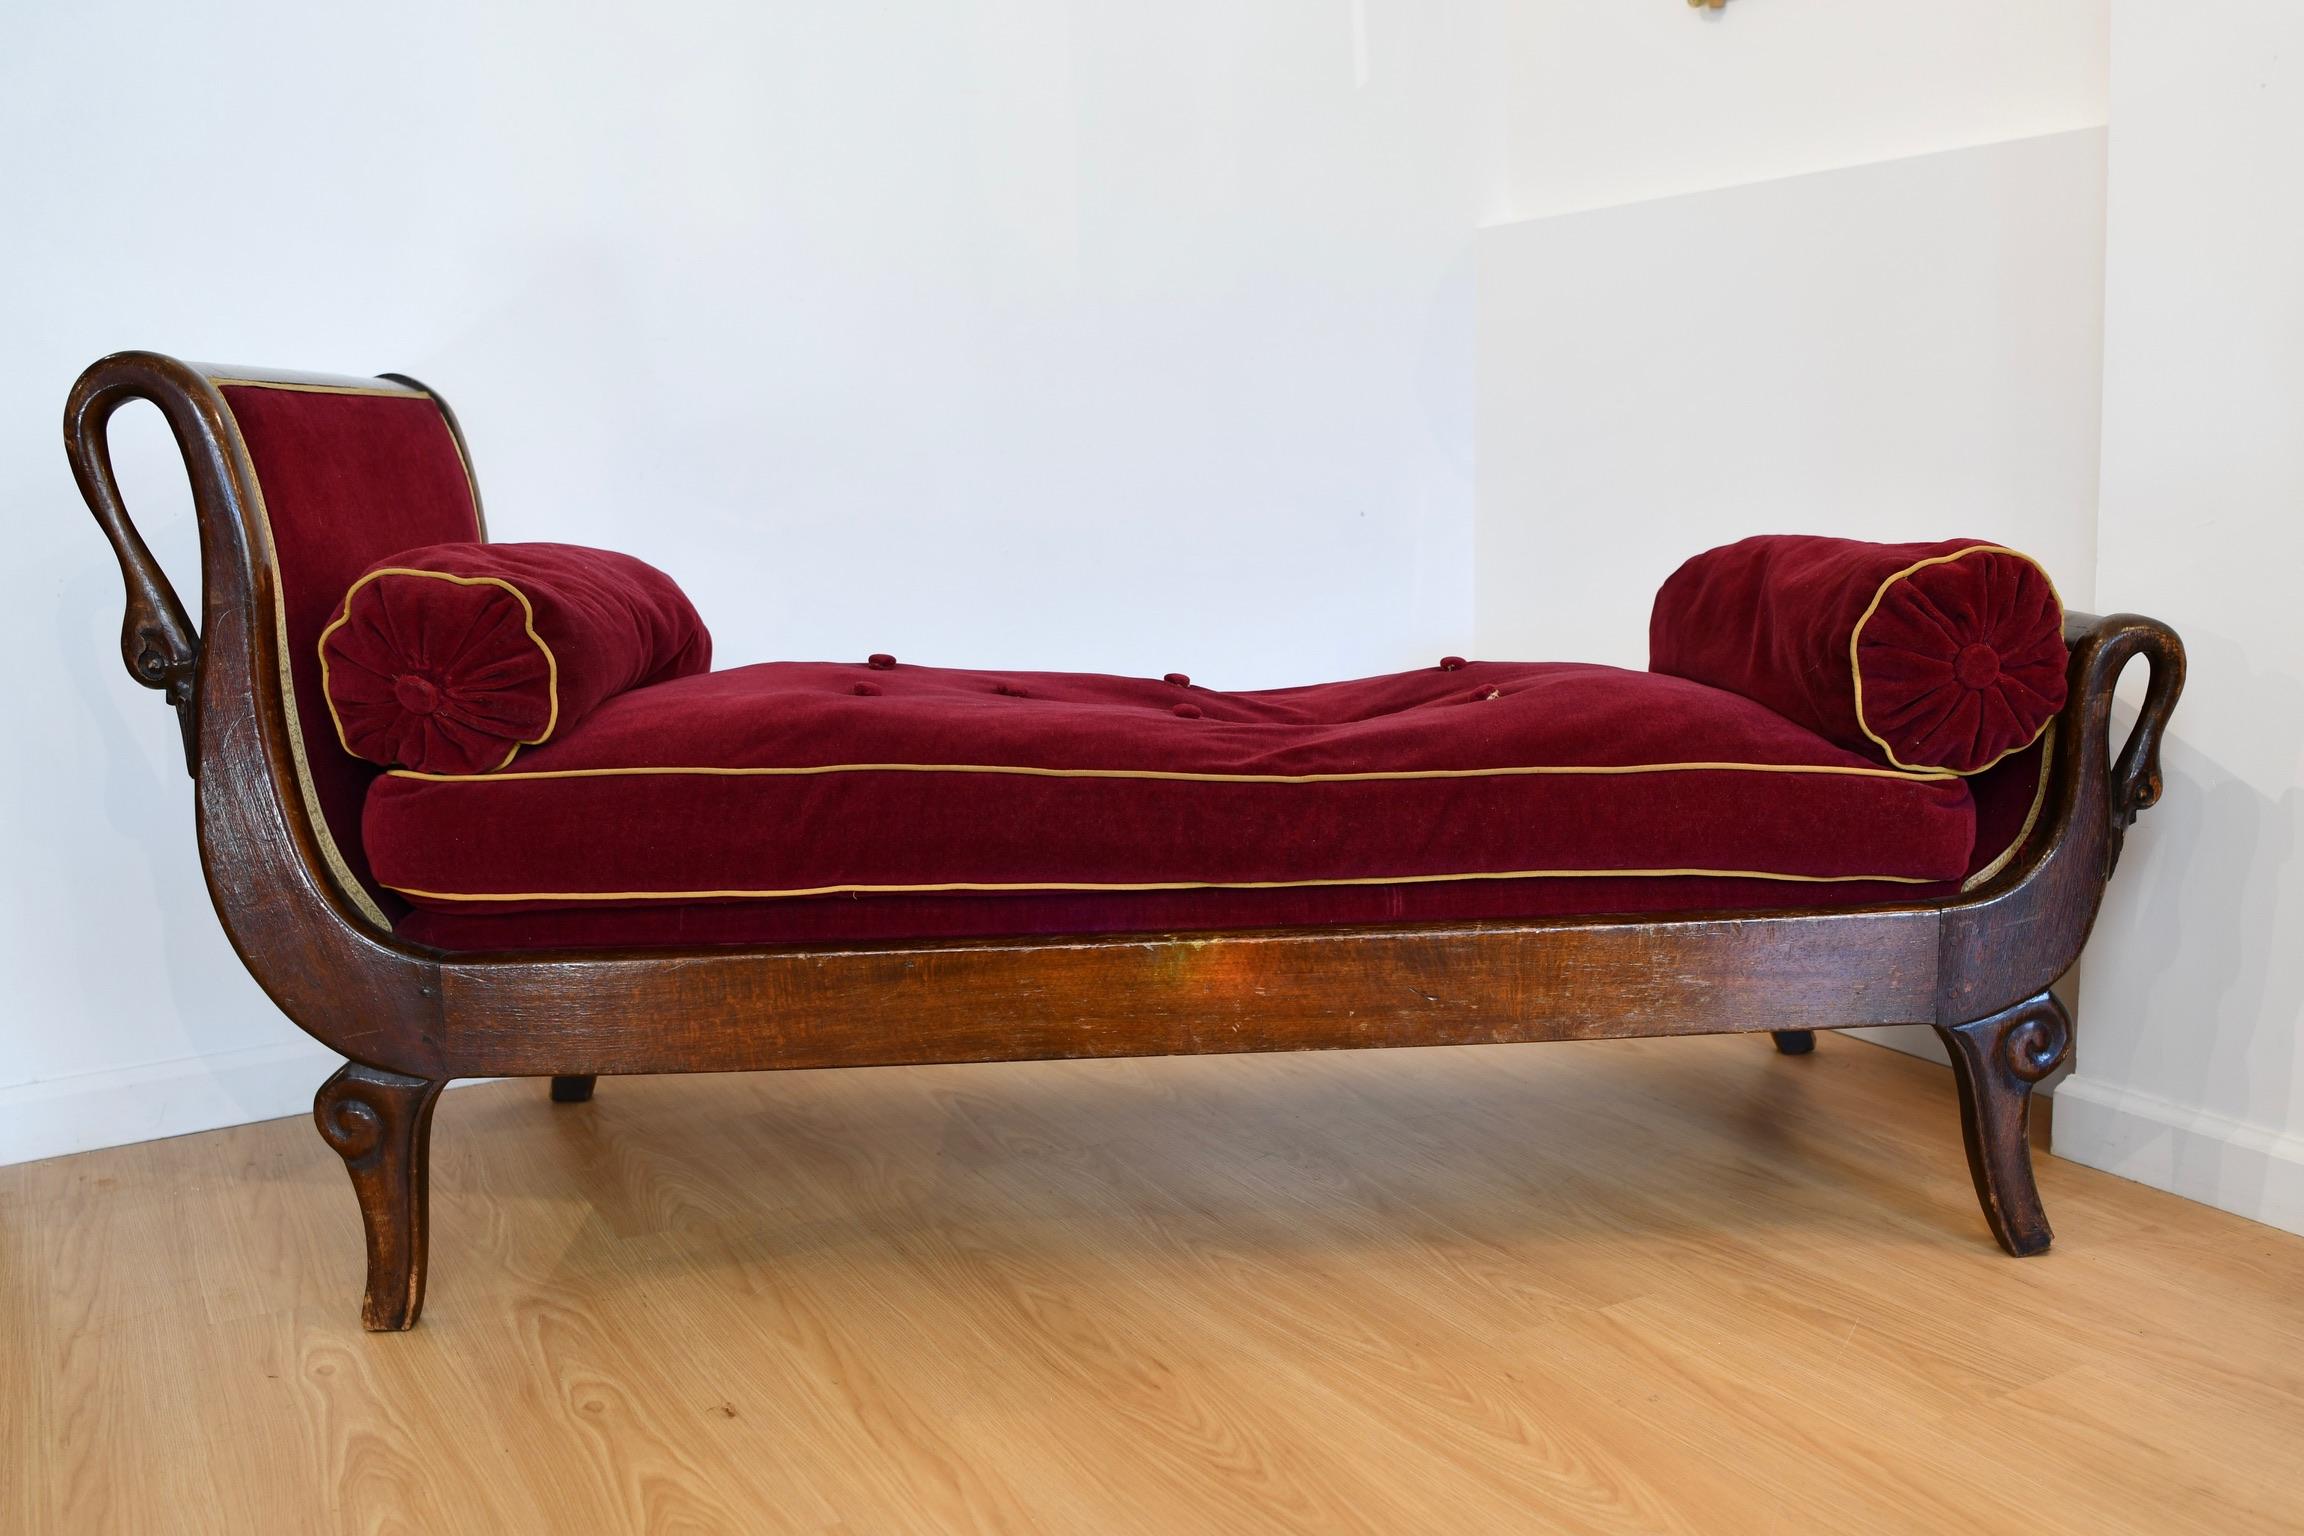 Antique French Mahogany Swan Decorated Chaise Longue For Sale 15